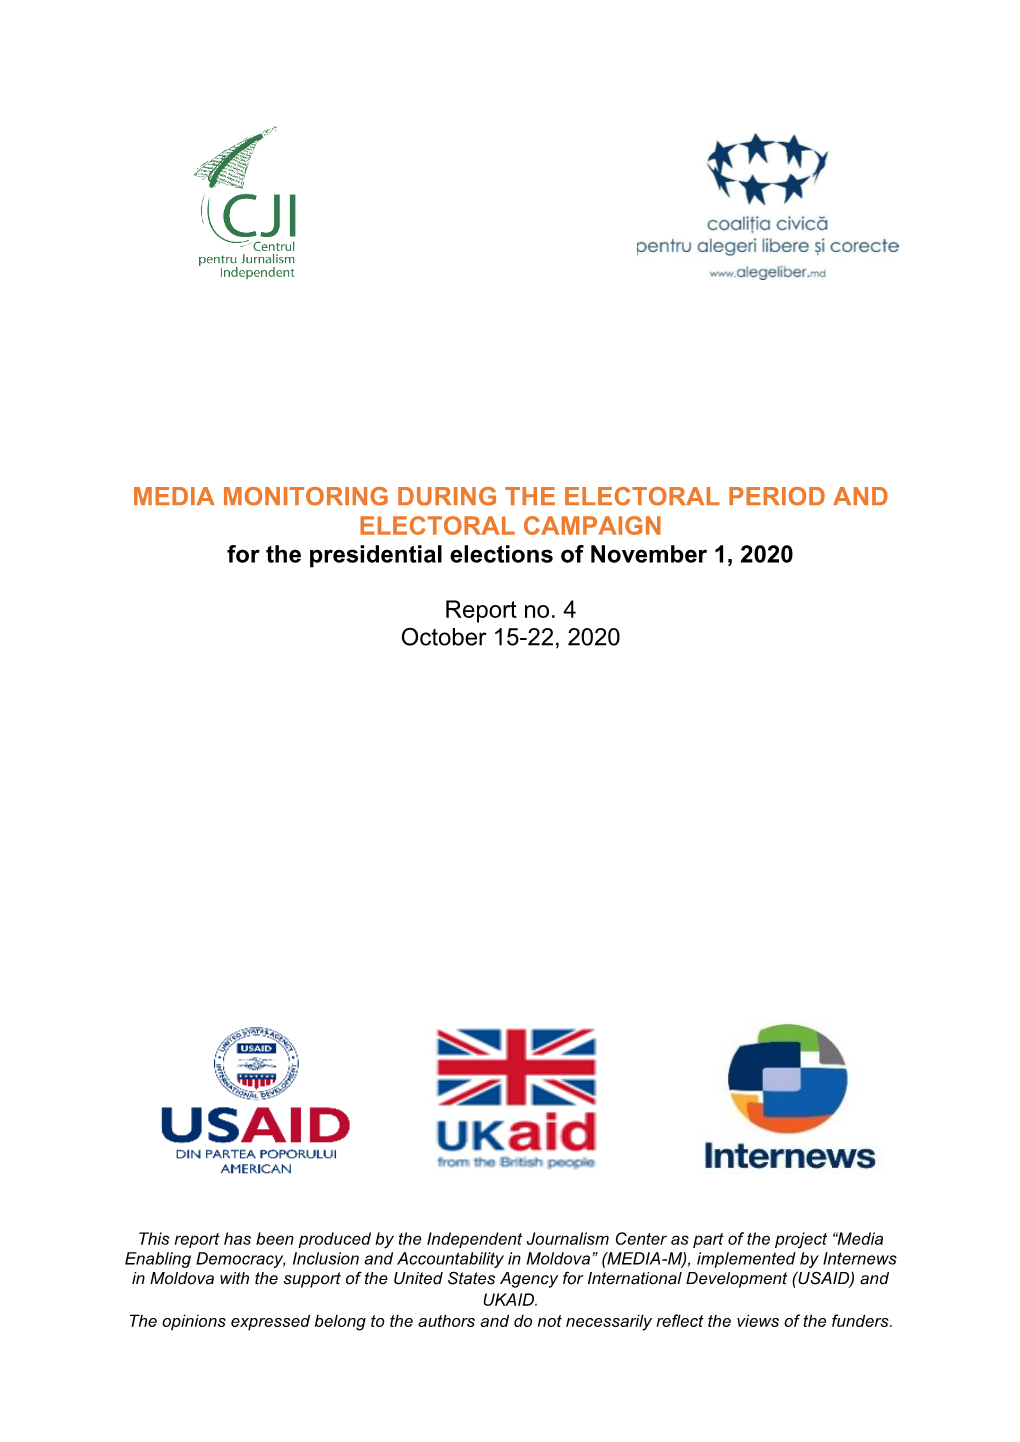 MEDIA MONITORING DURING the ELECTORAL PERIOD and ELECTORAL CAMPAIGN for the Presidential Elections of November 1, 2020